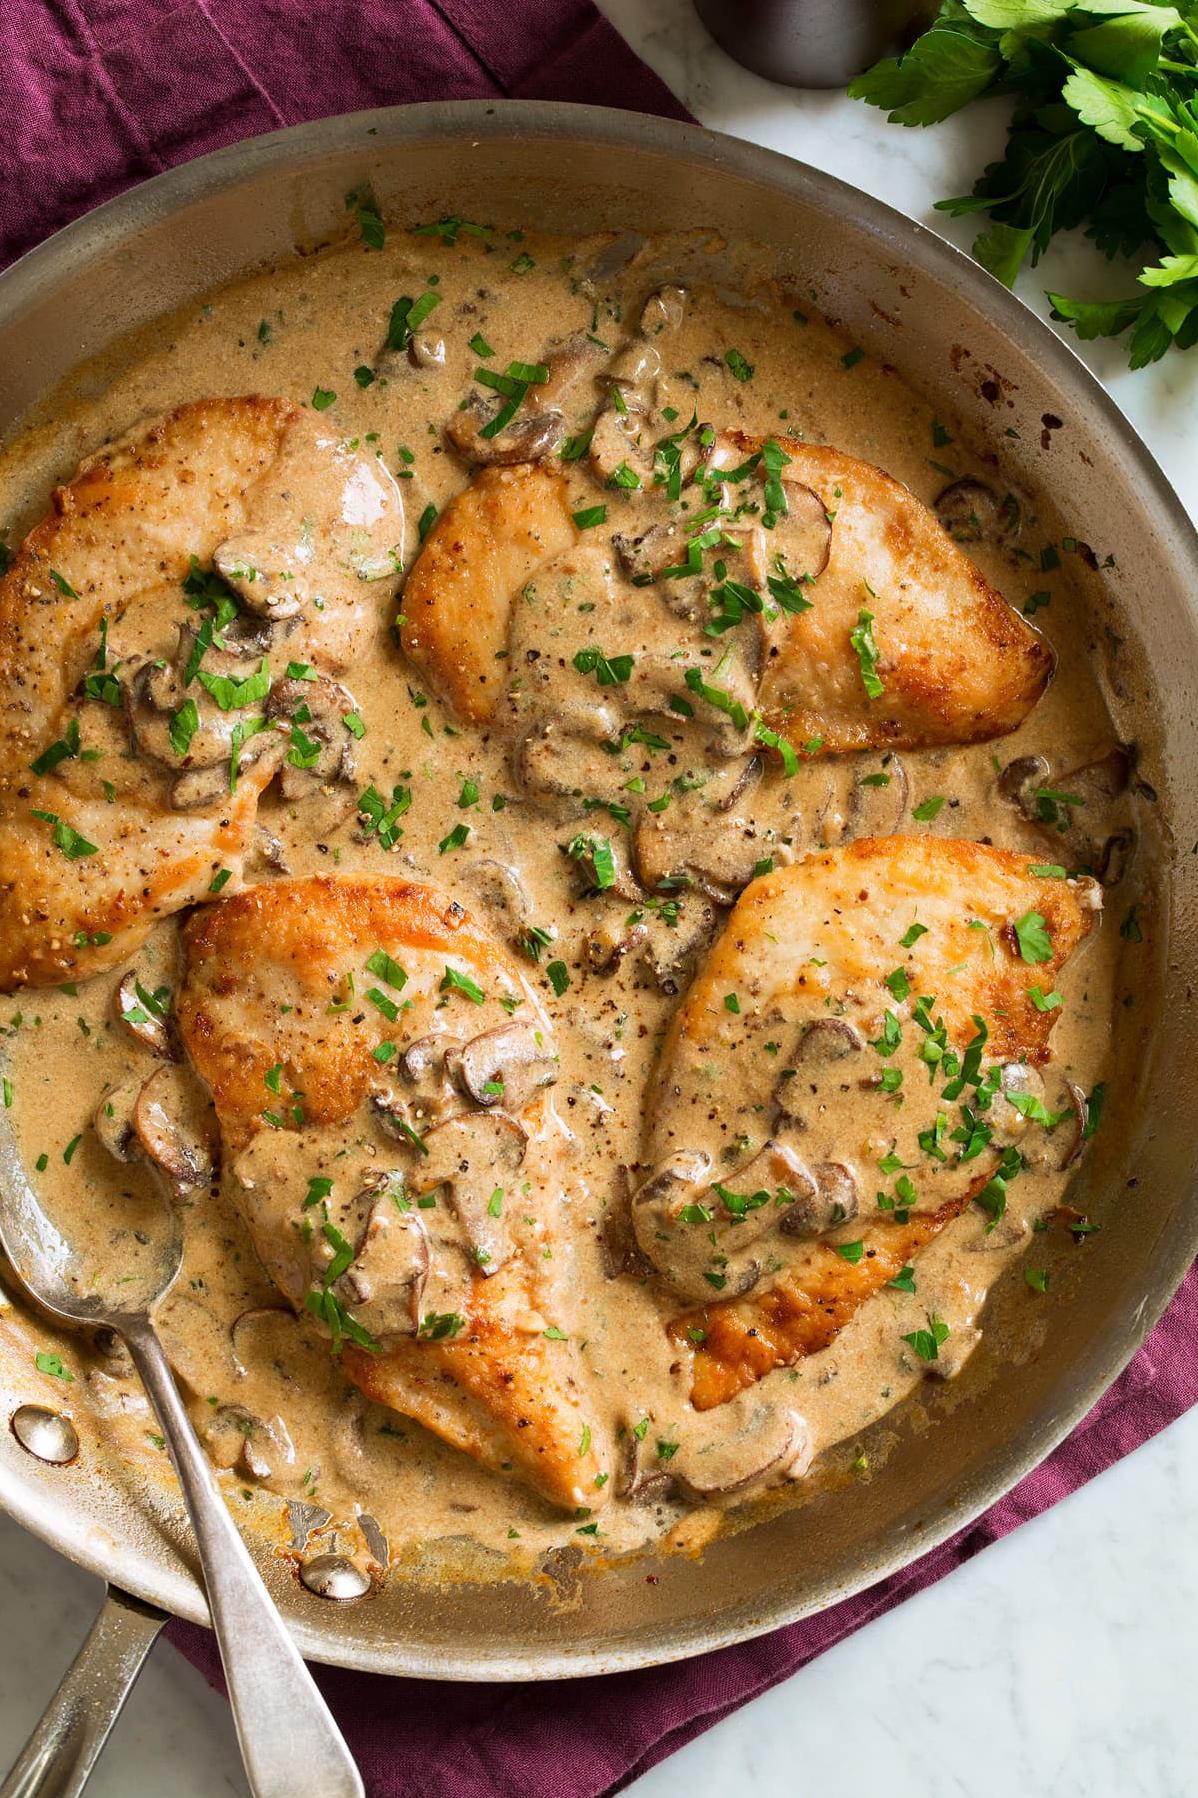 Authentic Chicken Marsala Recipe to Impress Your Guests